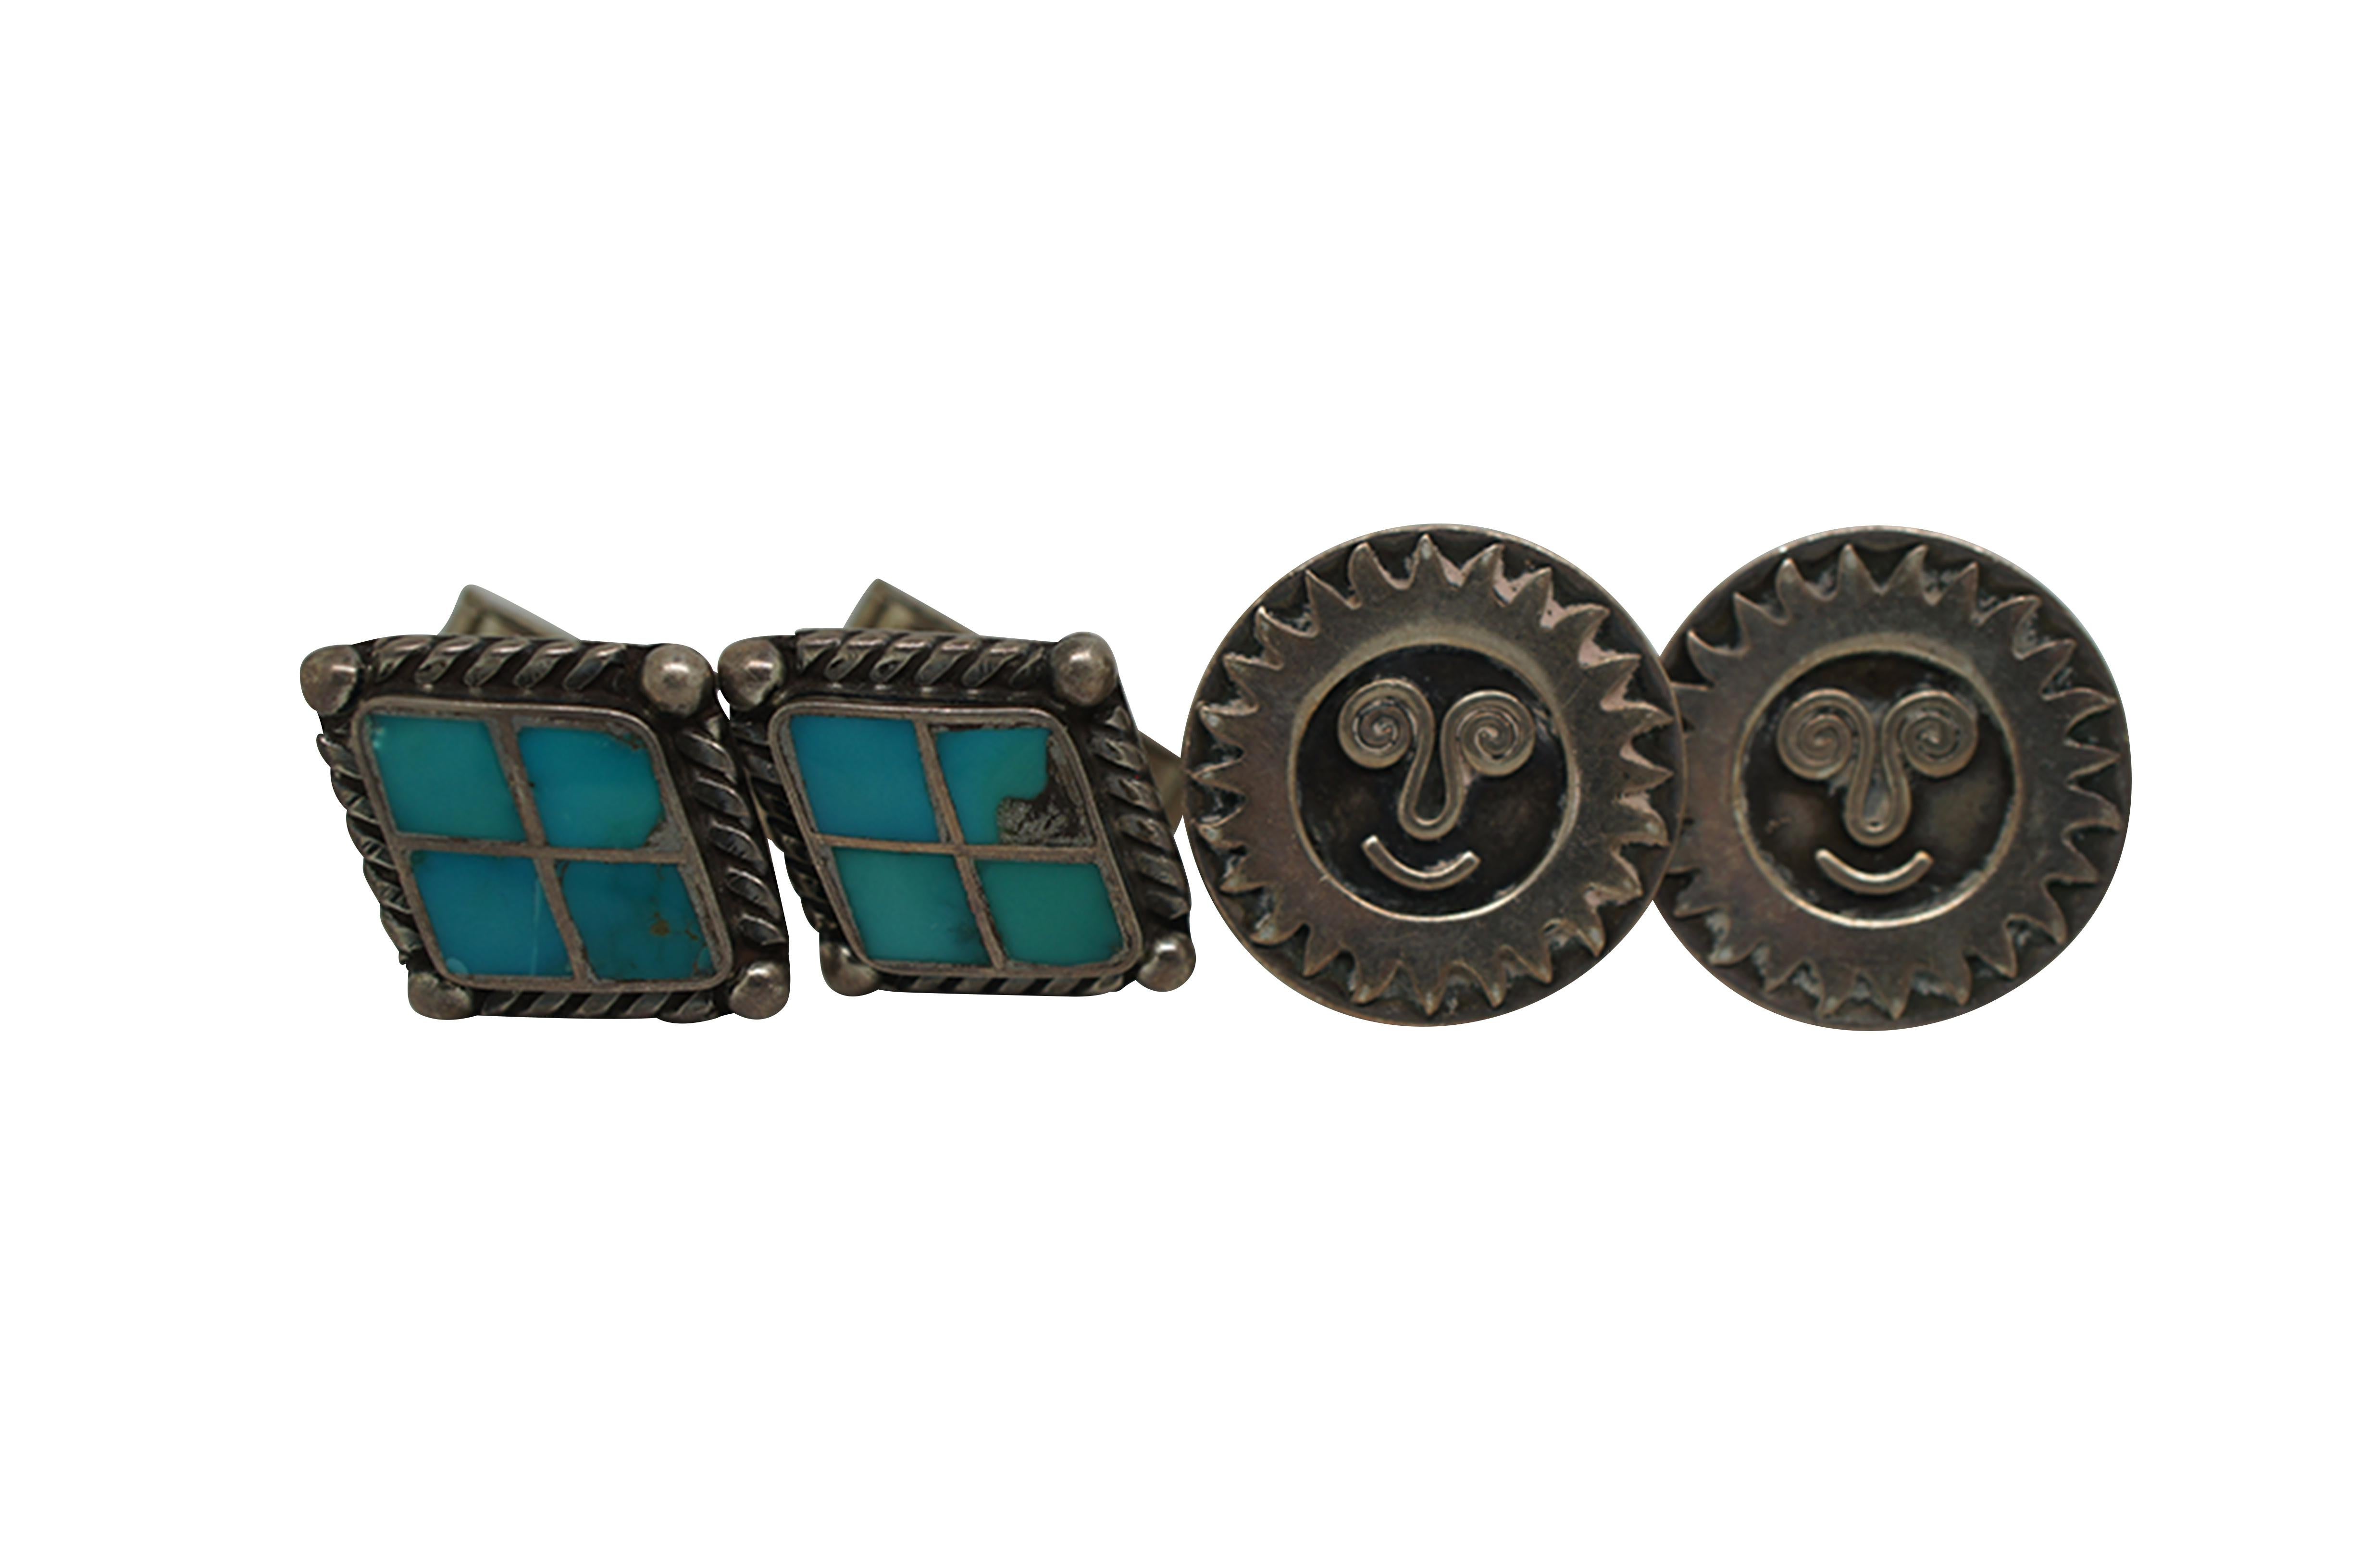 Lot of 5 pairs of vintage sterling silver cufflinks, primarily featuring Southwest or Mexican styling. Lot includes: smiling suns by Hogan Bolas; diamonds inlaid with turquoise / enamel; roadrunners with inlaid turquoise / enamel; cowboy / Stetson